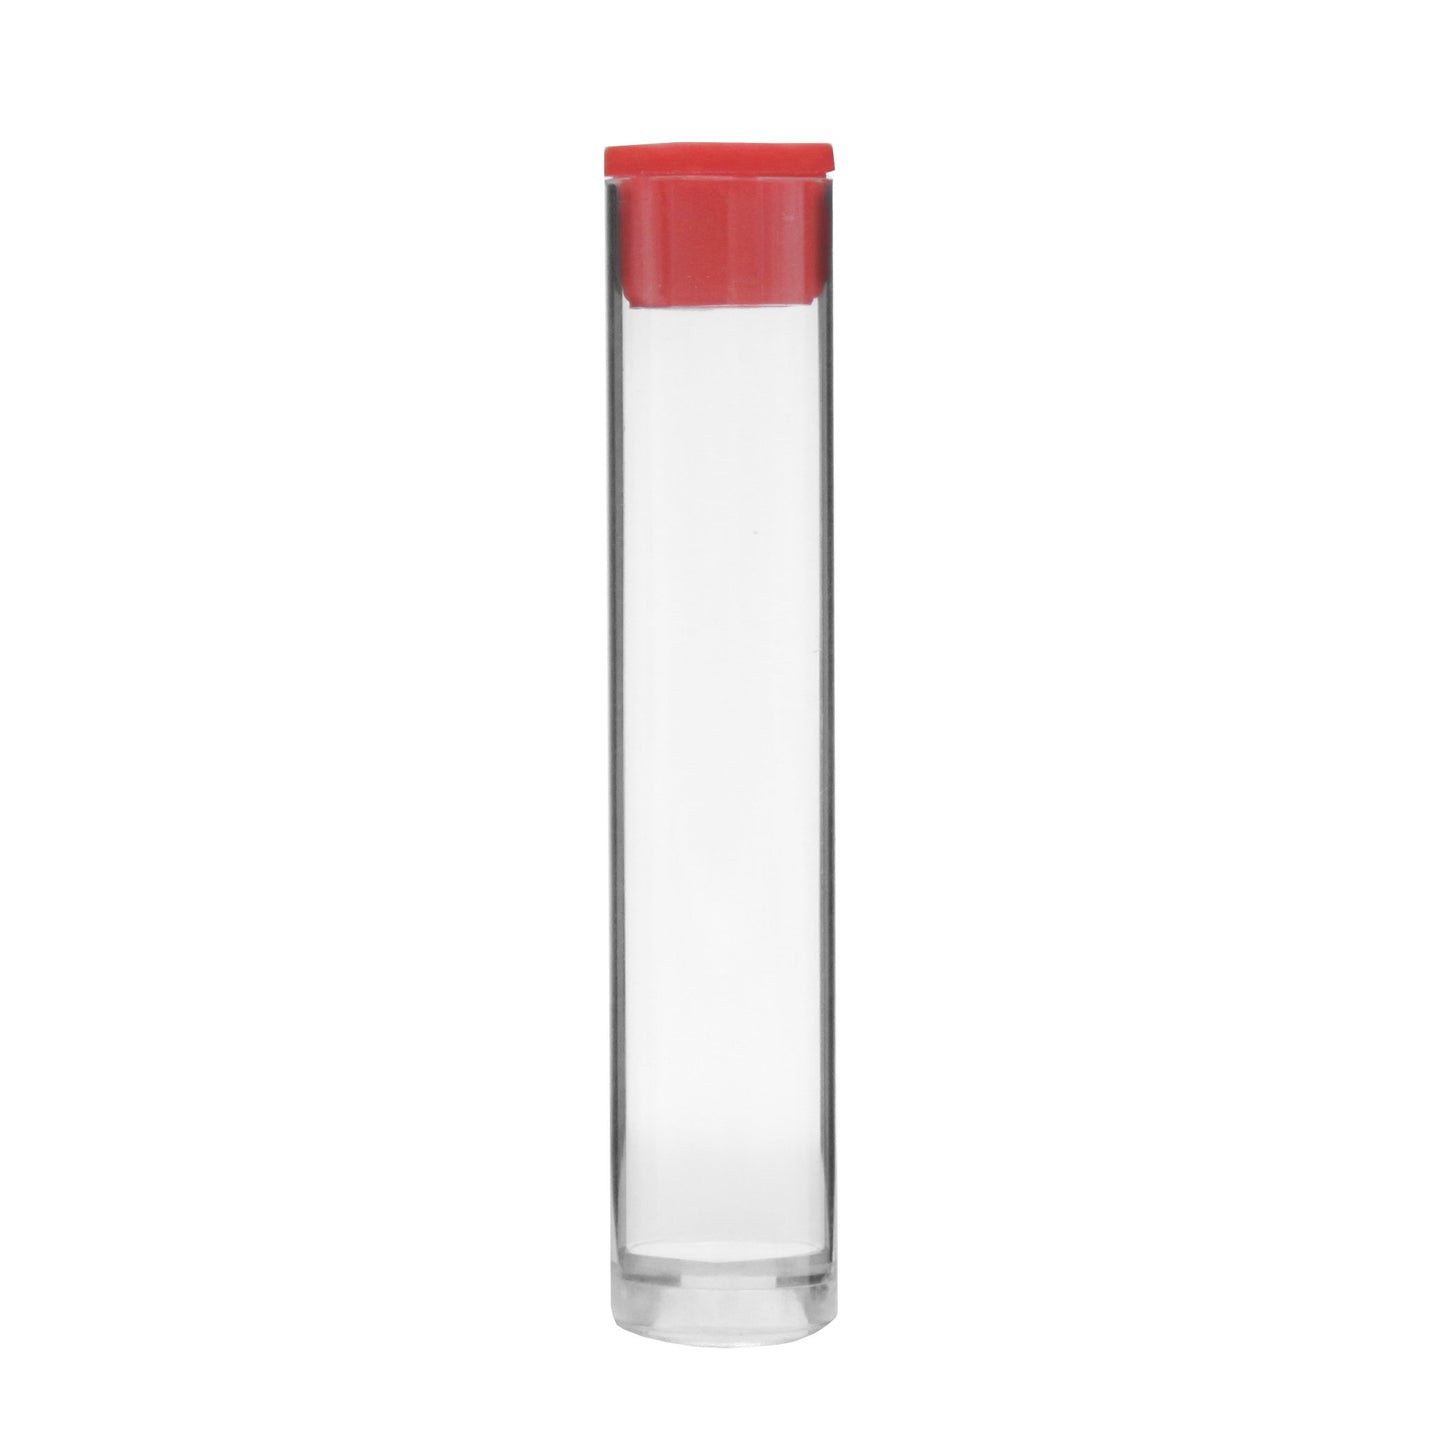 Plastic Tubes for Cartridges 13mm x 85mm Red